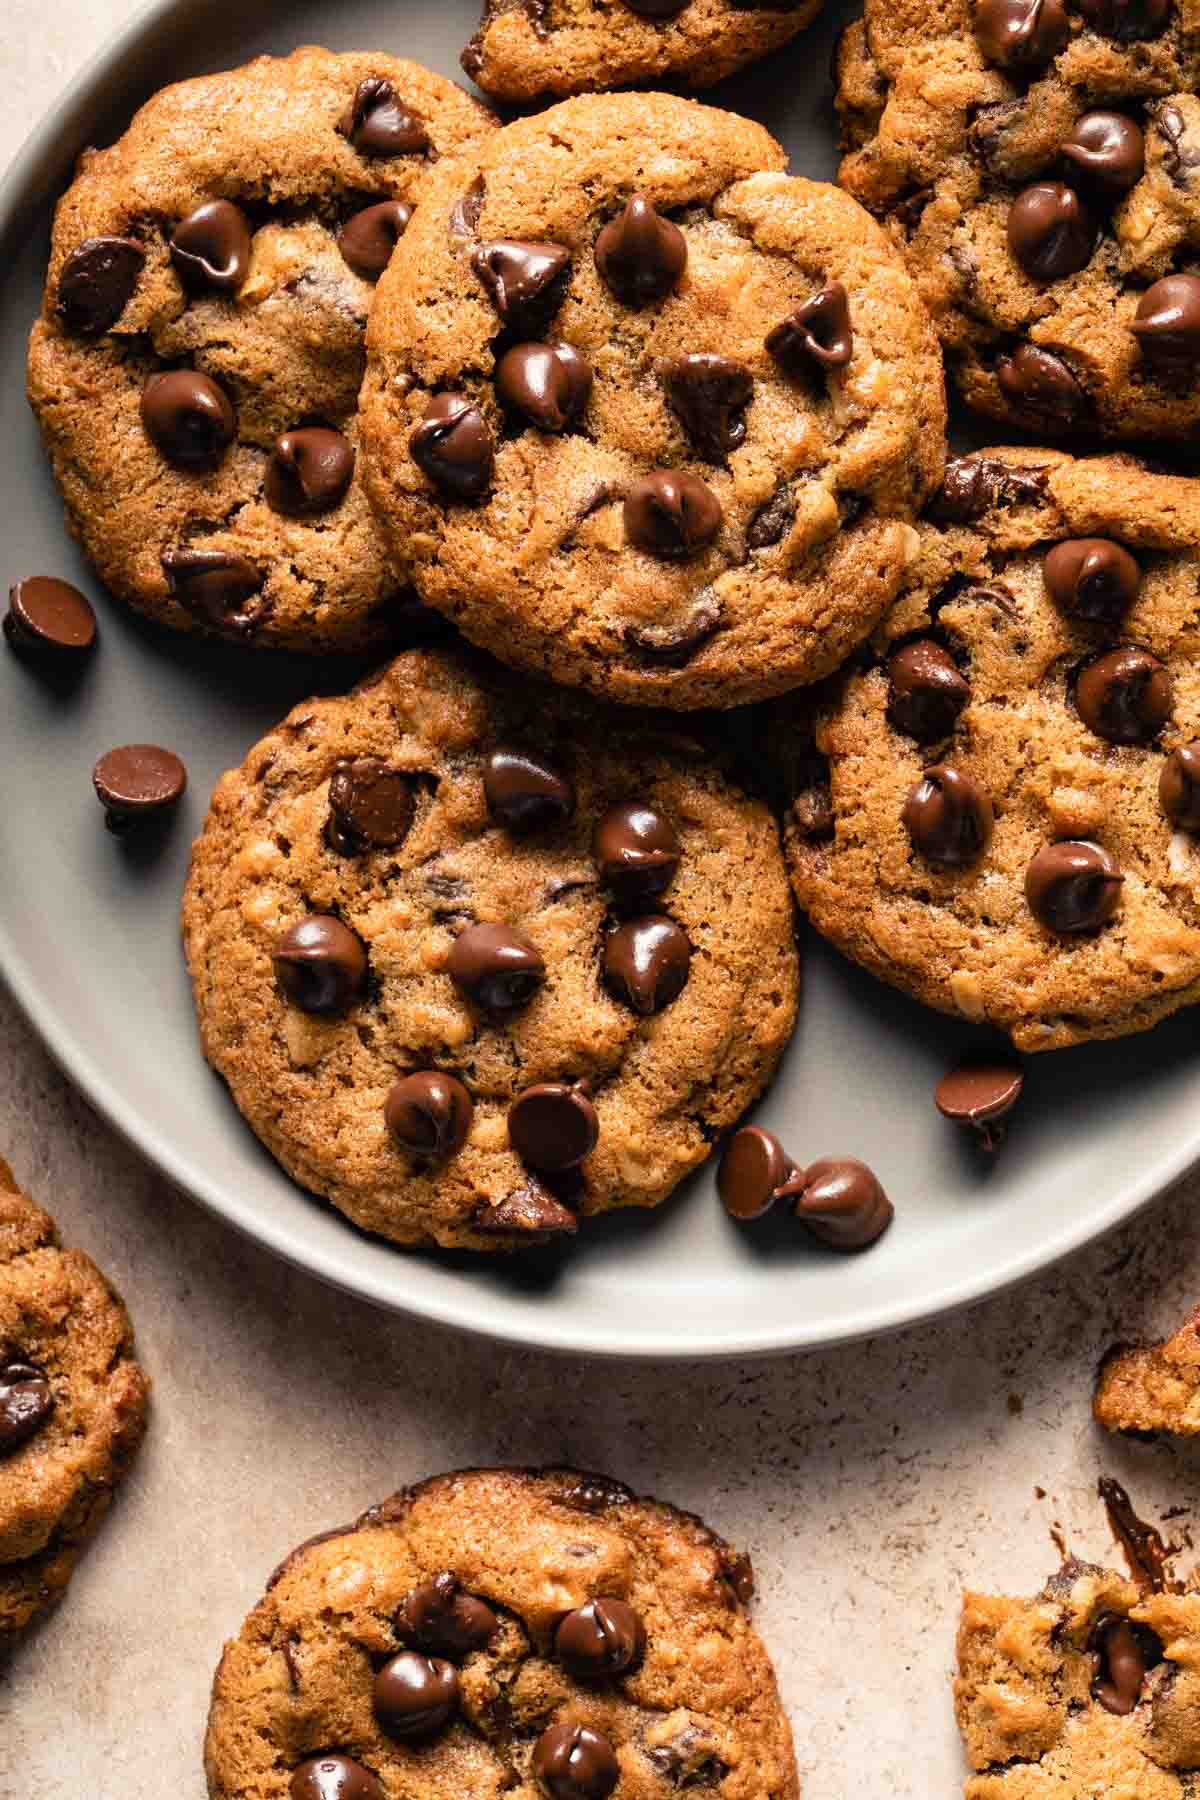 Close up view of chocolate chip cookies on a grey plate.